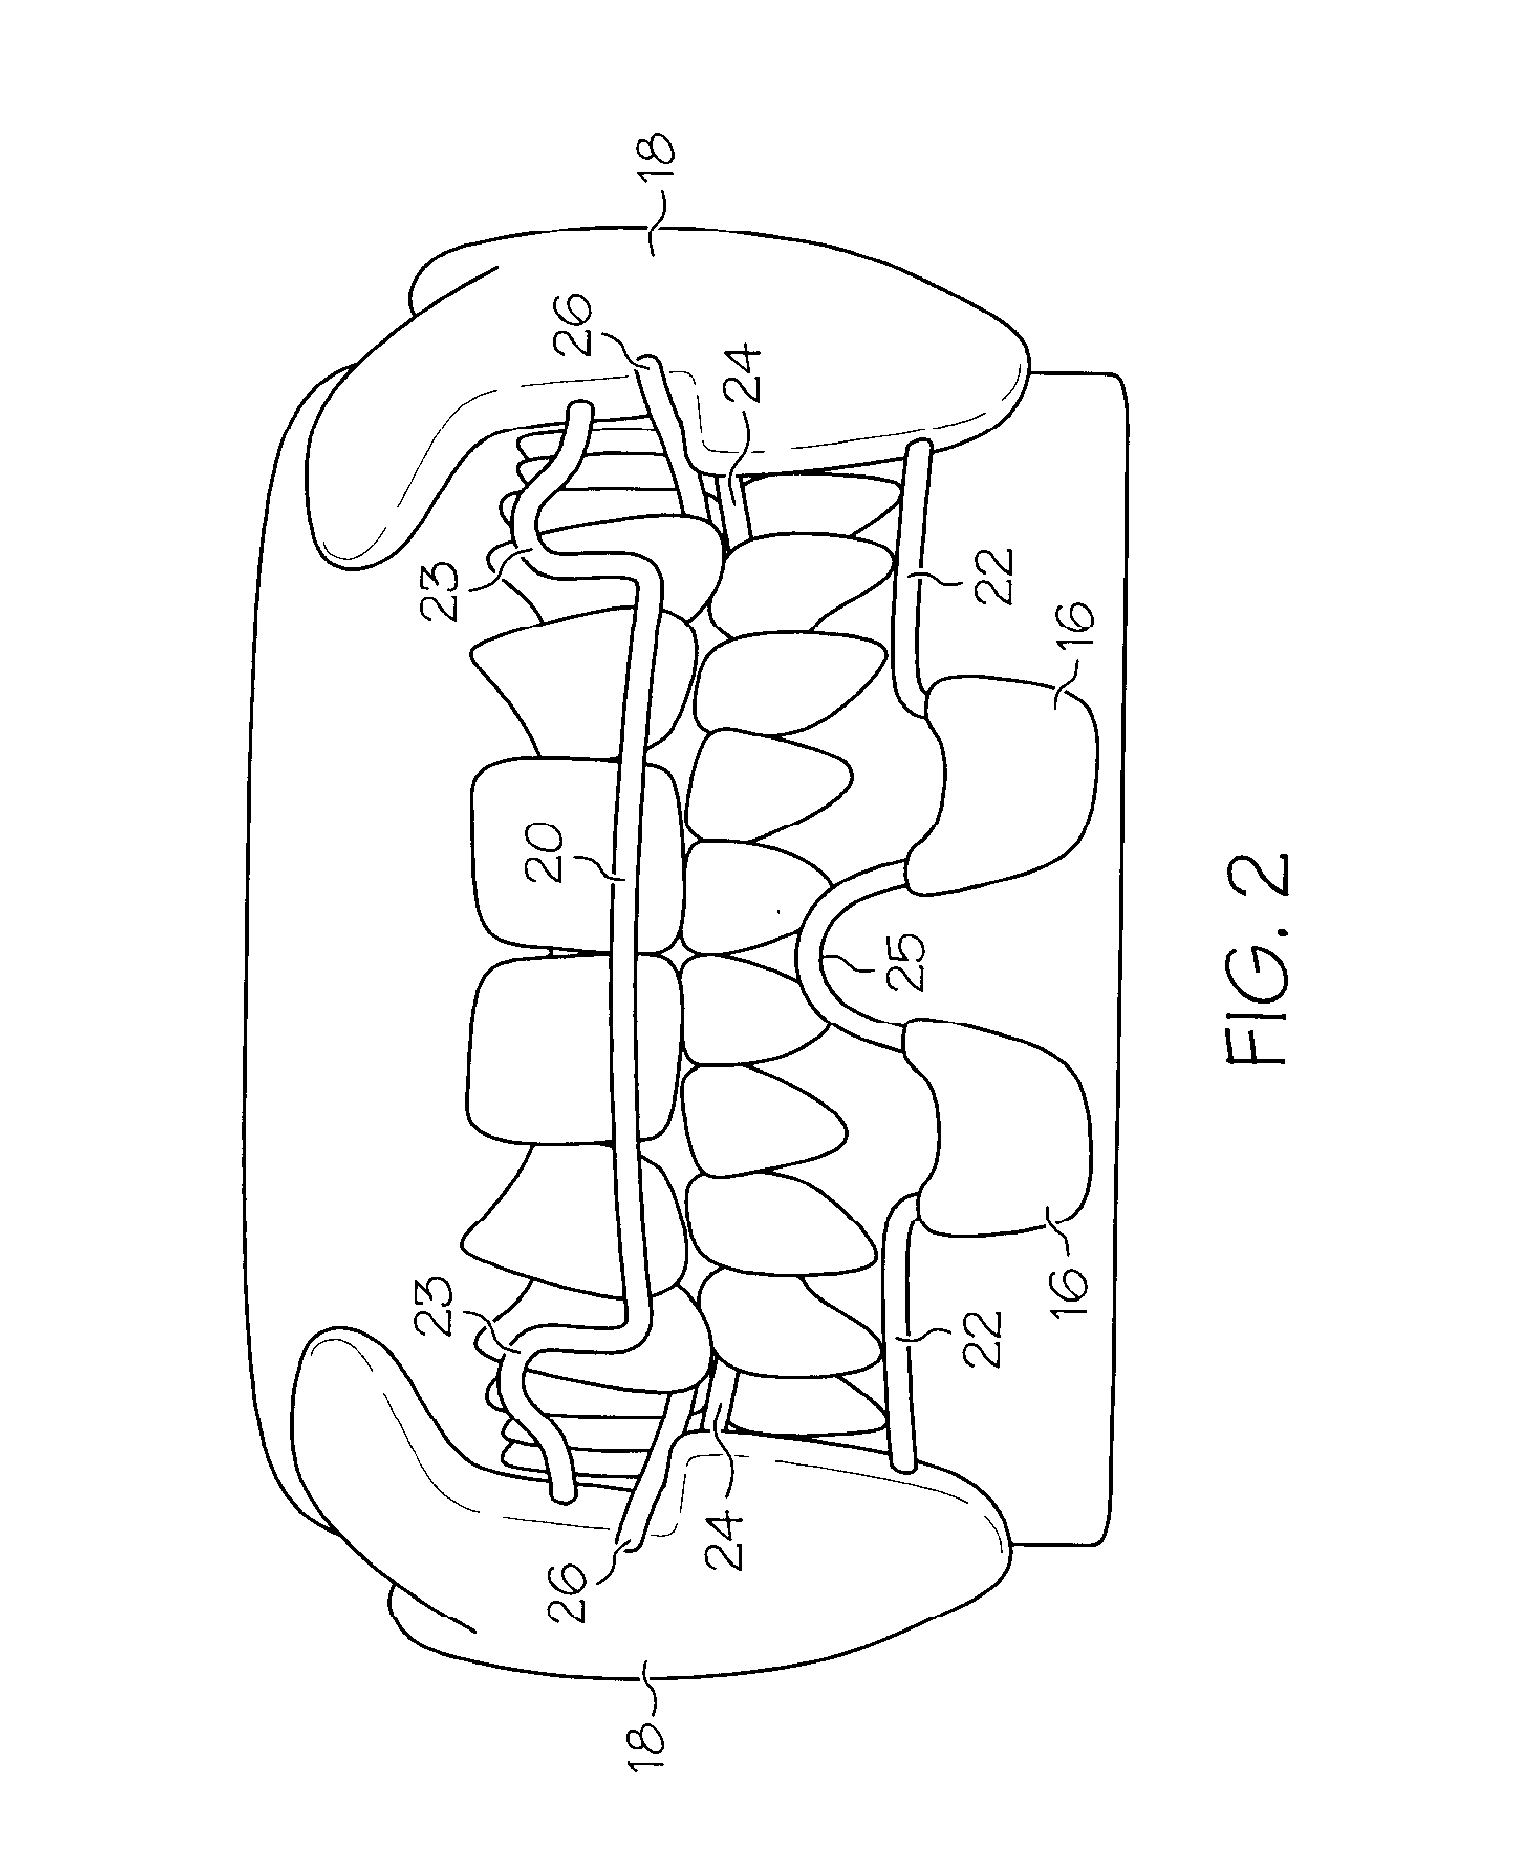 Intraoral apparatus for treating upper airway disorders